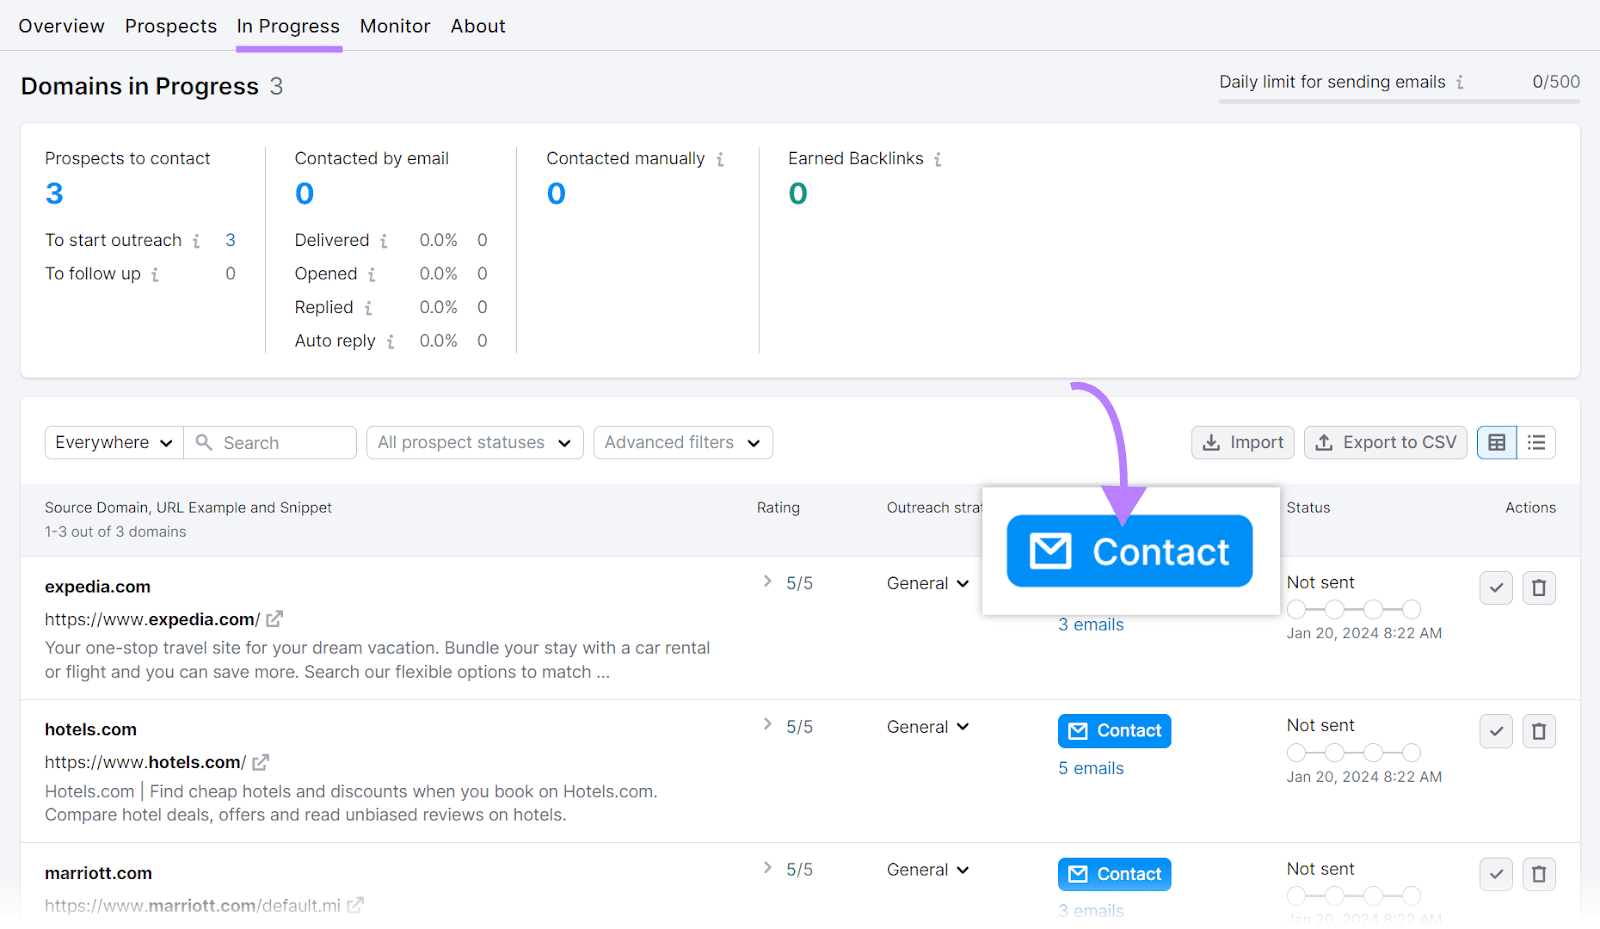 “Contact” button highlighted next to "expedia.com" result under "In Progress" tab